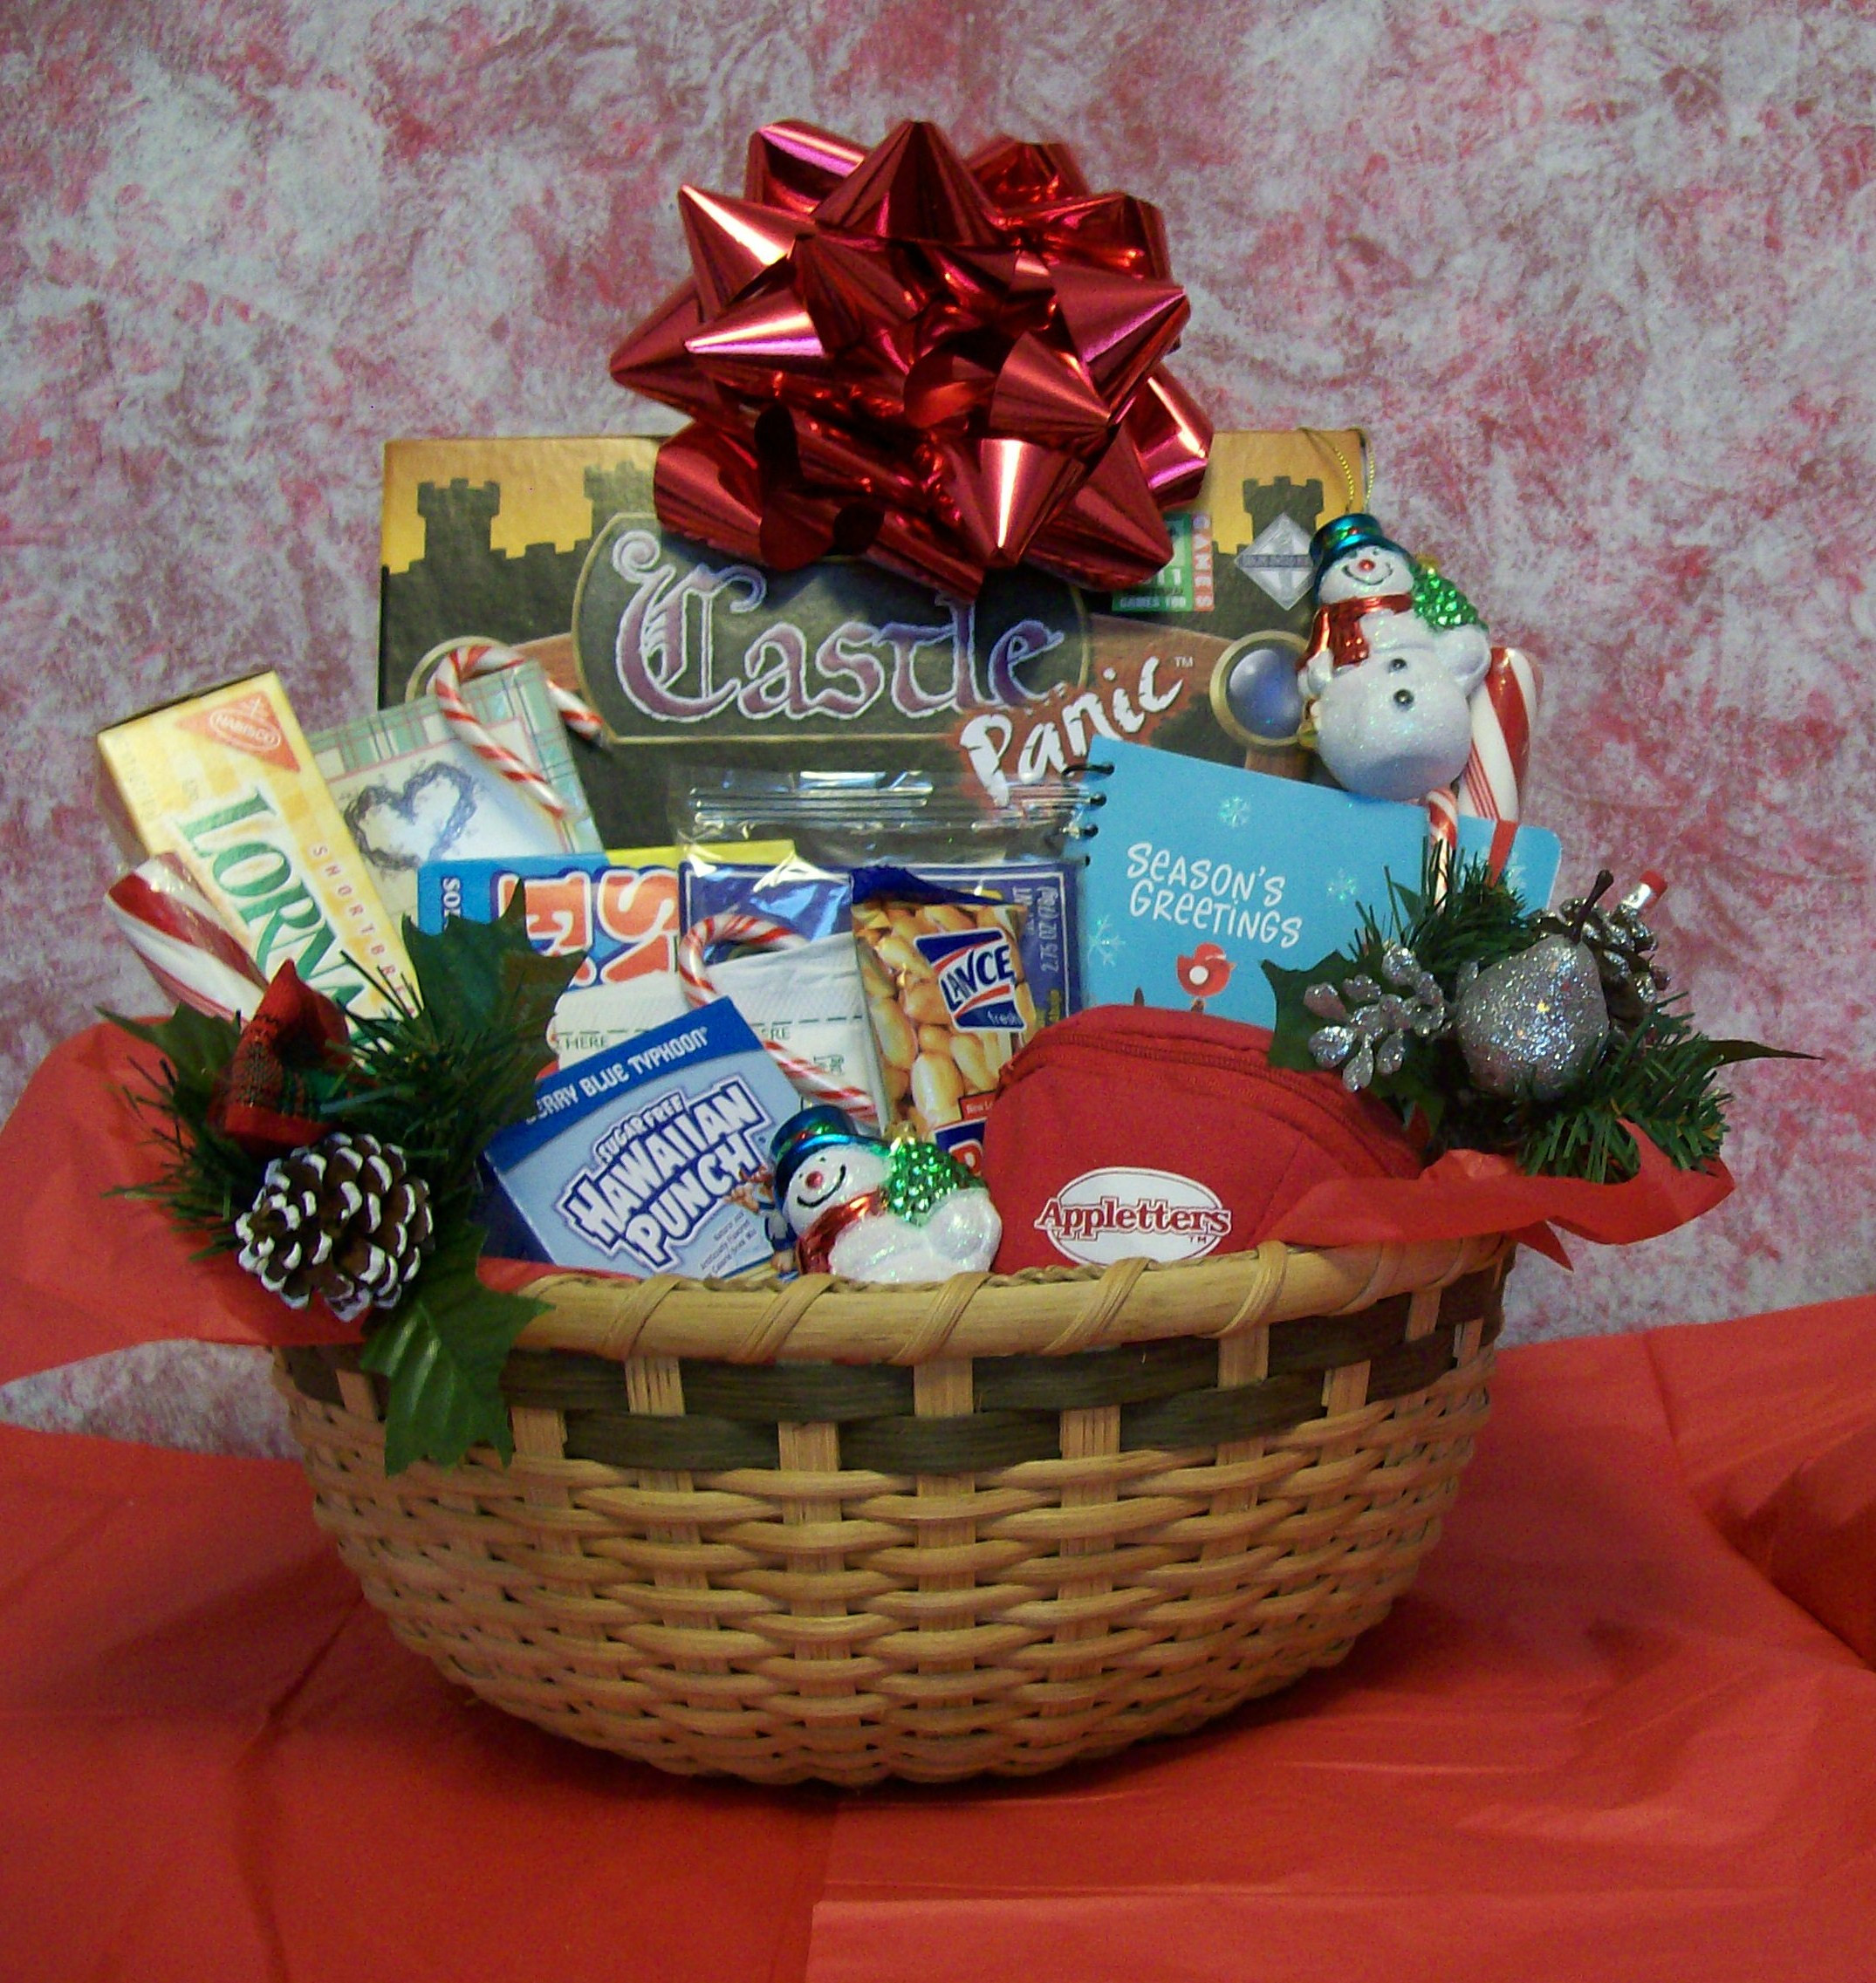 Fun Family Gifts For Christmas
 Create a Christmas Fun and Games Gift Basket for a Family